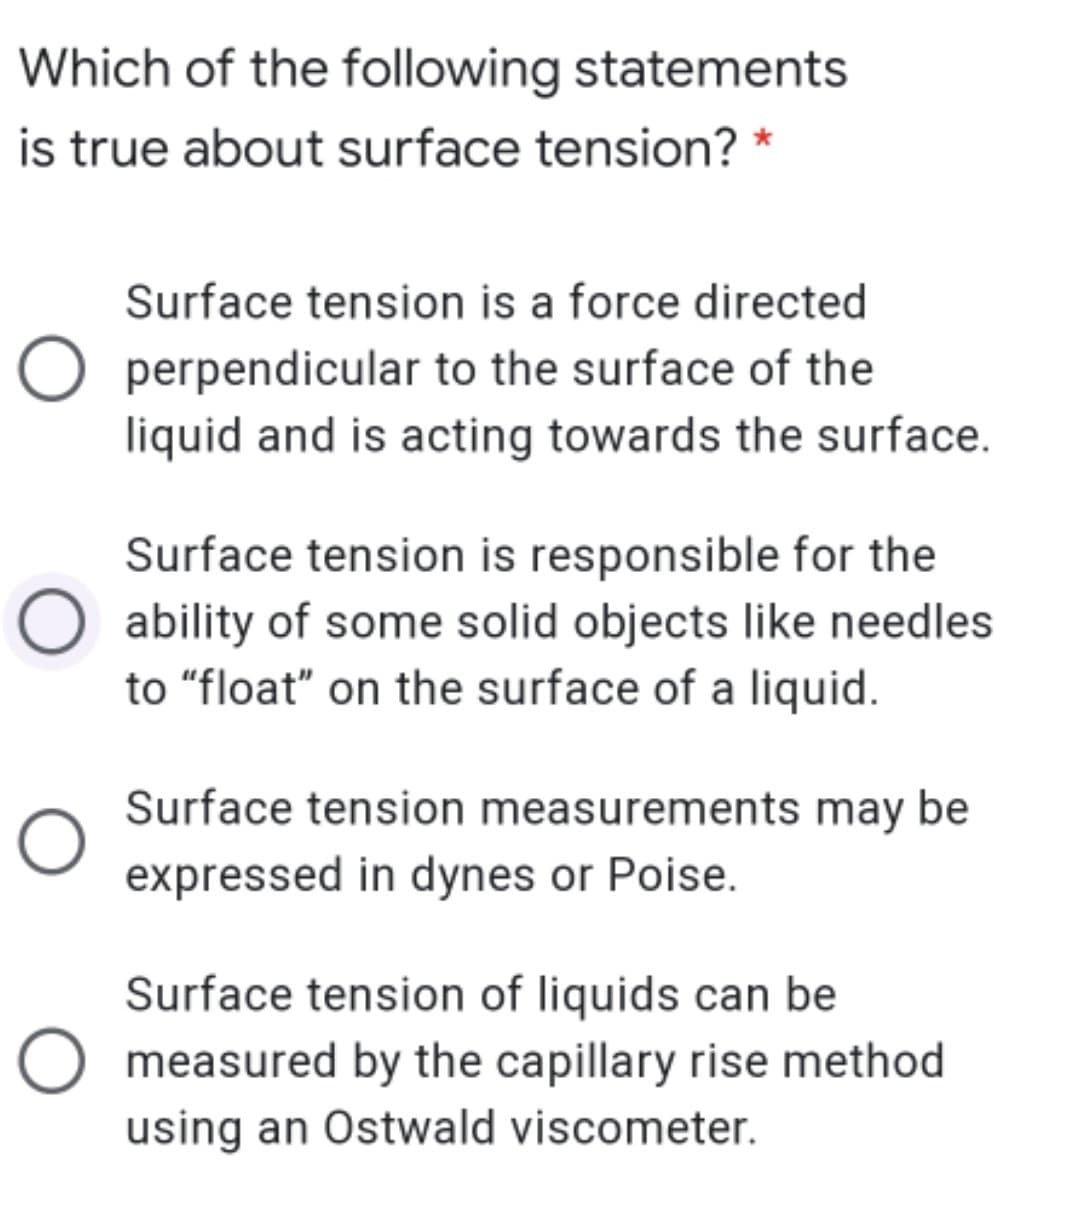 Which of the following statements
is true about surface tension? *
Surface tension is a force directed
O perpendicular to the surface of the
liquid and is acting towards the surface.
Surface tension is responsible for the
O ability of some solid objects like needles
to "float" on the surface of a liquid.
Surface tension measurements may be
expressed in dynes or Poise.
Surface tension of liquids can be
O measured by the capillary rise method
using an Ostwald viscometer.
